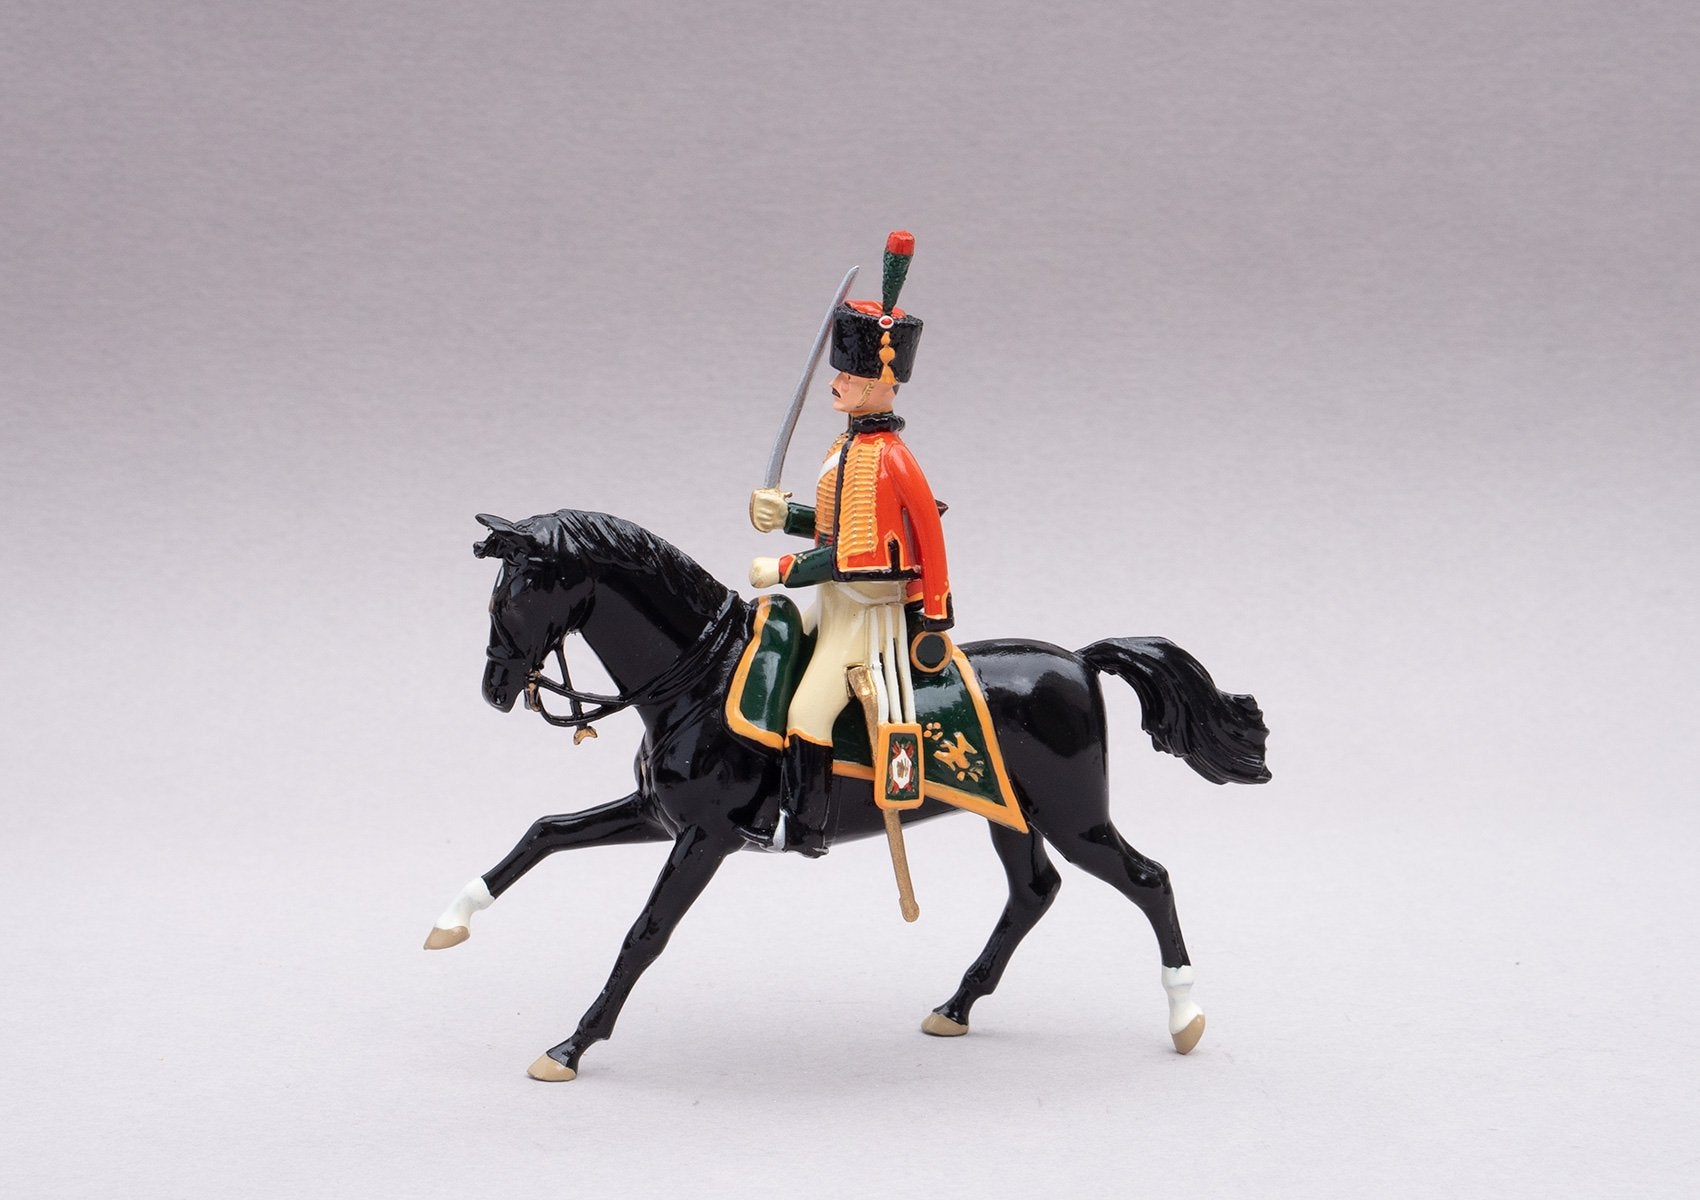 Set 95 Chasseurs à Cheval | French Cavalry | Napoleonic Wars | Single mounted figure with carbine and sabre | Waterloo | © Imperial Productions | Sculpt by David Cowe